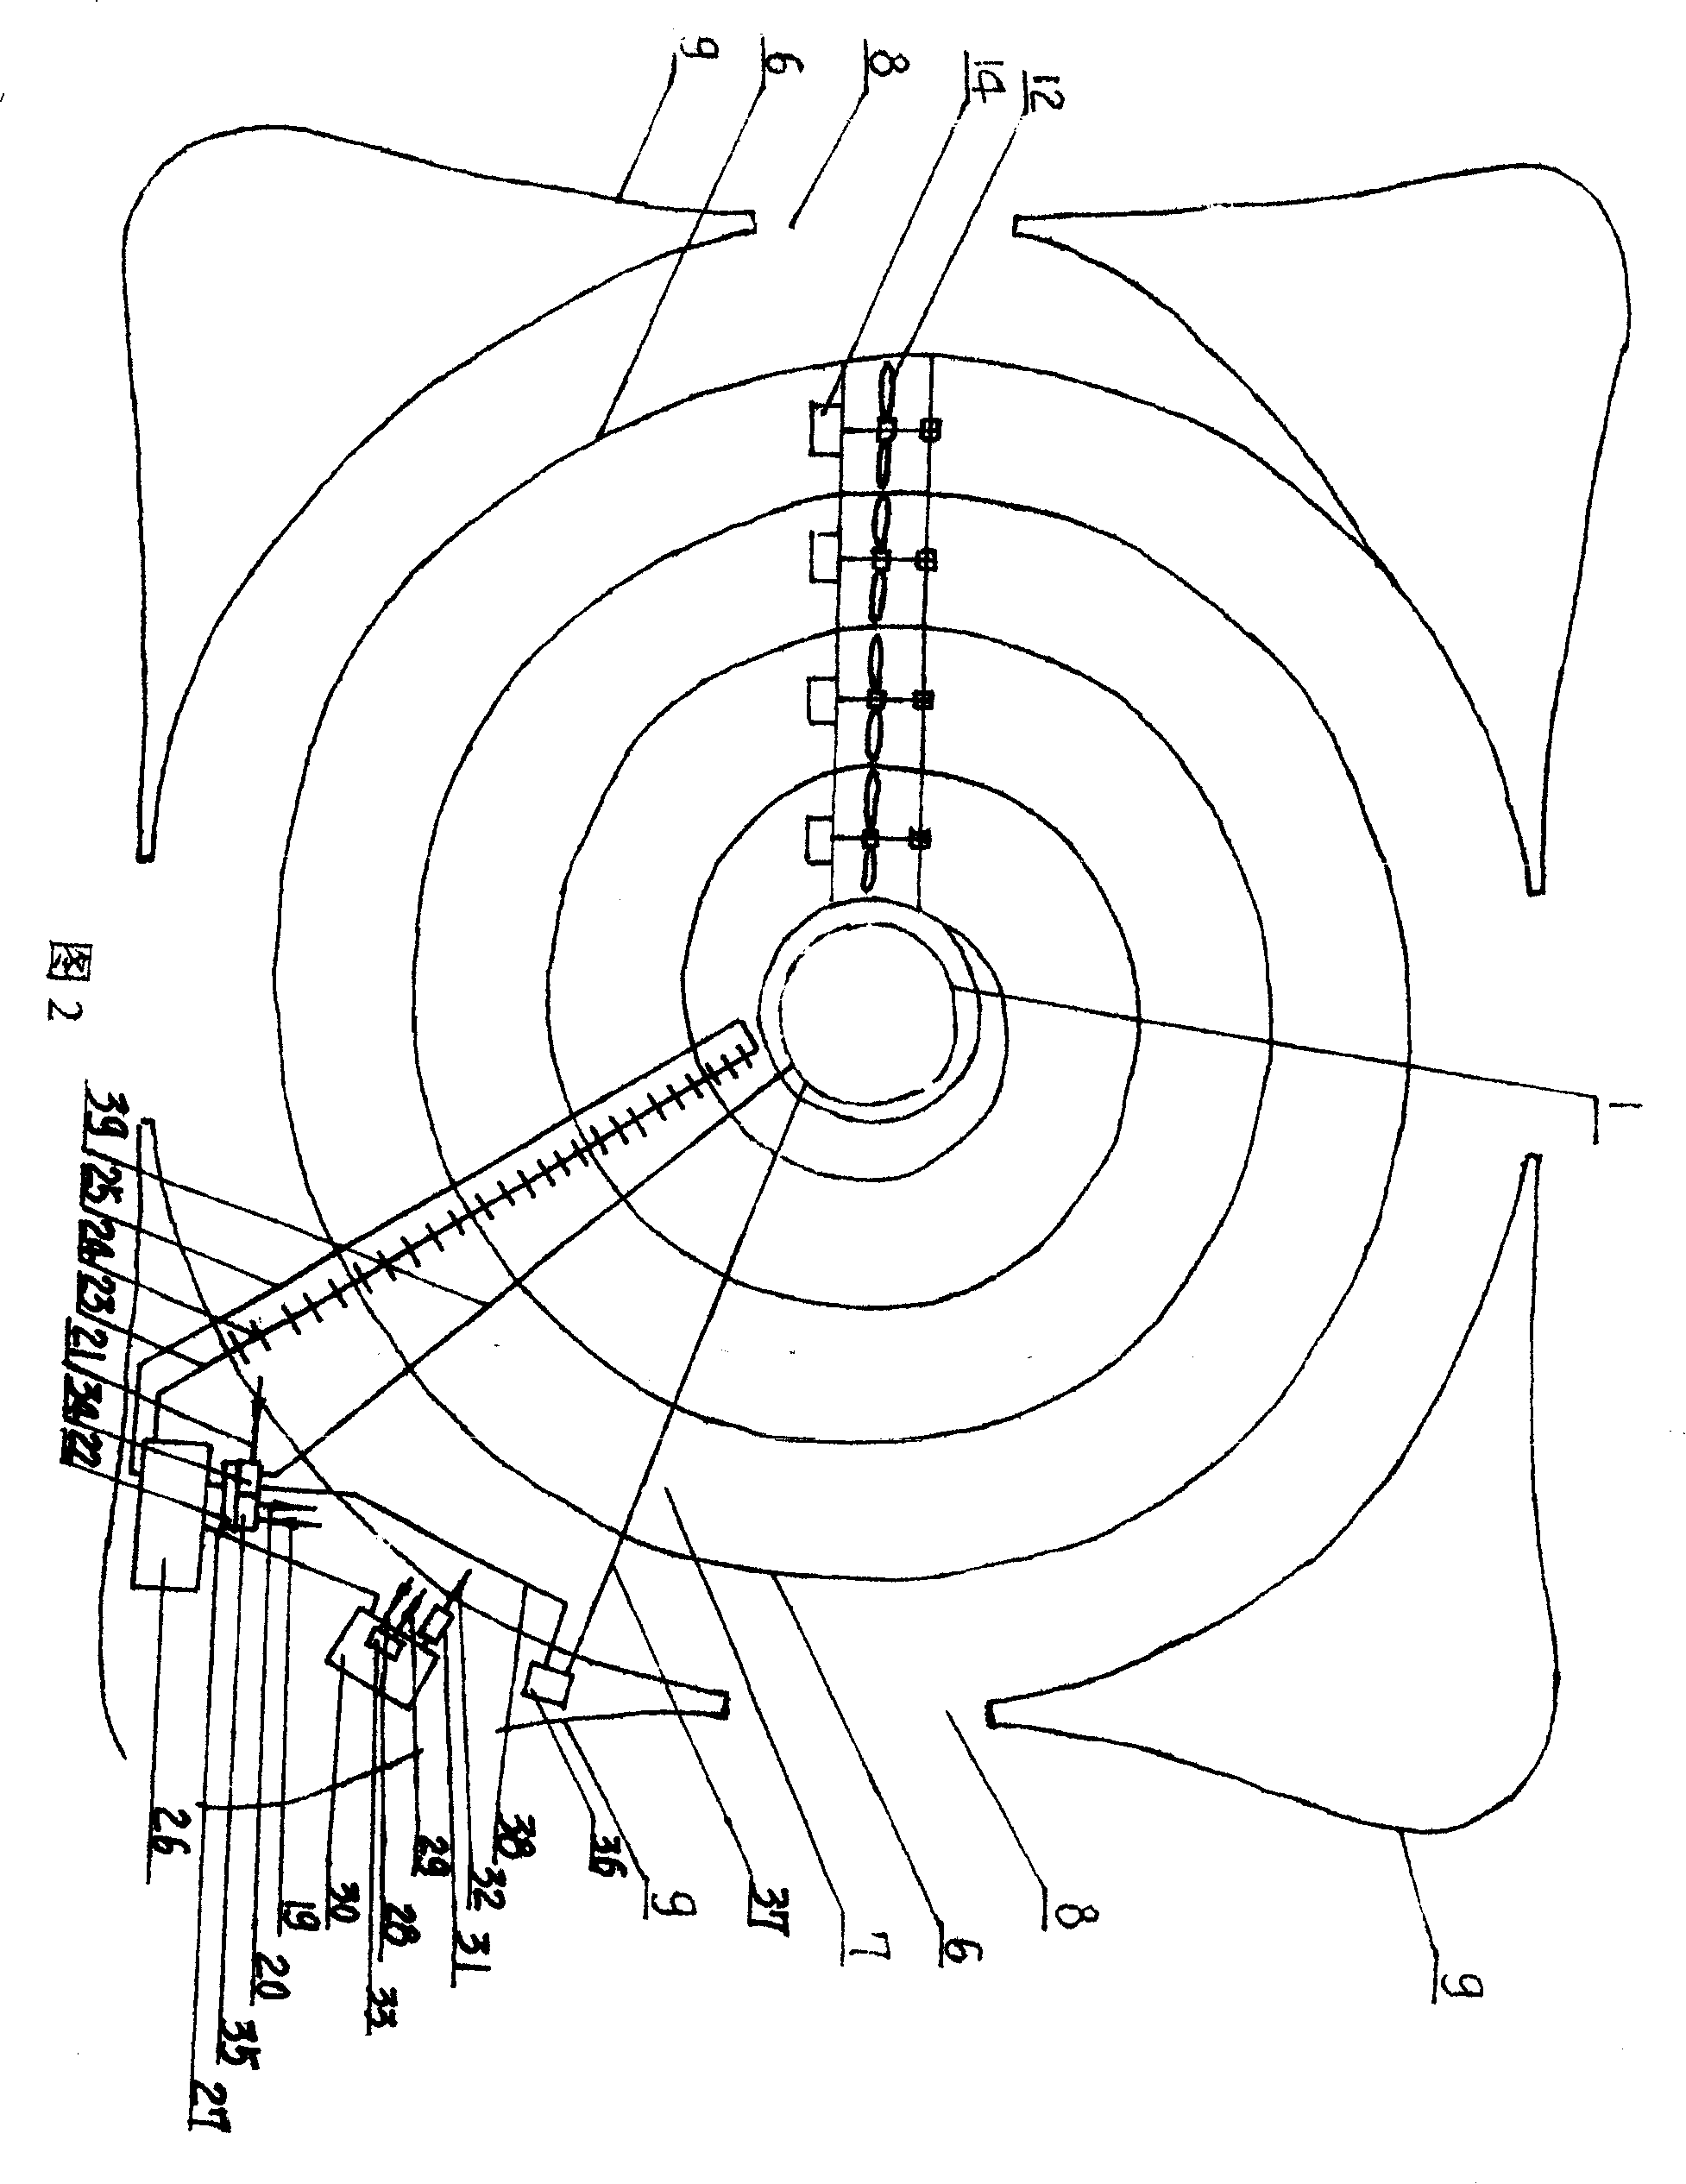 Apparatus for electricity generation by refuse incineration and hot air flow